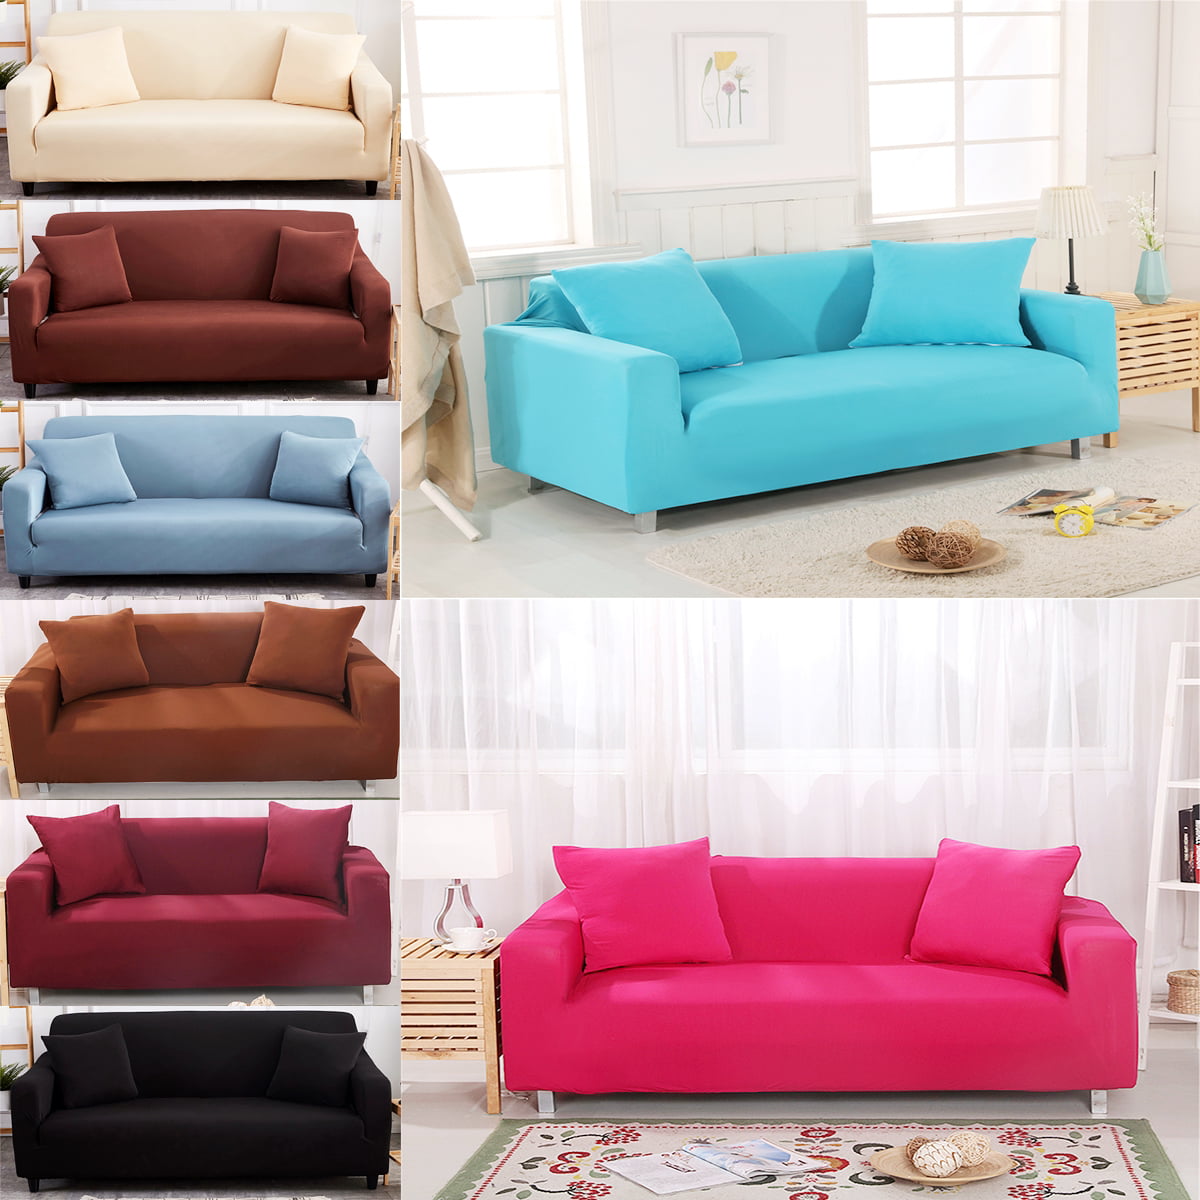 Details about   2 3 4 Seater Sofa Covers Stretch Couch Lounge Recliner Chair Slipcover Protector